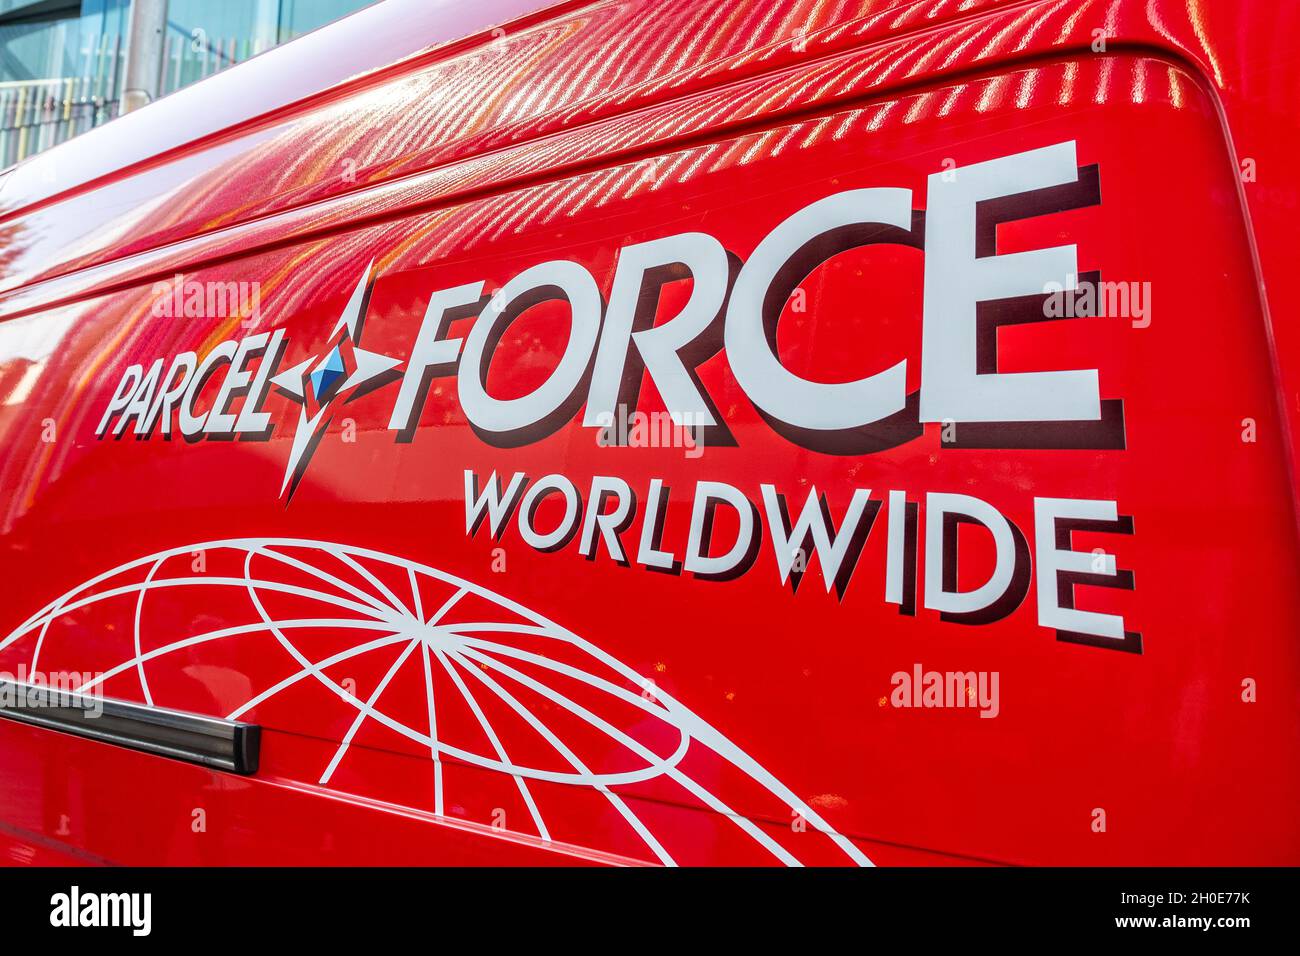 Parcel Force Worldwide logo on the side of a delivery van. Stock Photo